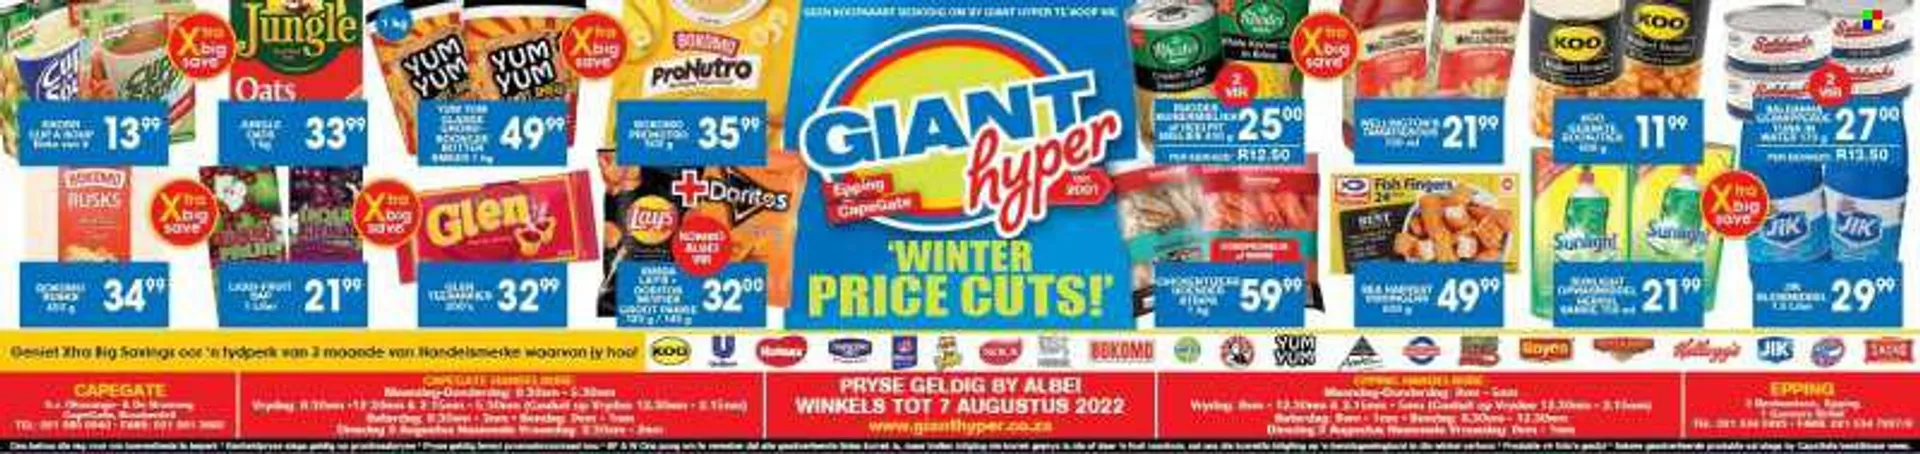 Giant Hyper catalogue  - 29/07/2022 - 07/08/2022 - Sales products - rusks, beans, tuna, fish, fish fingers, Sea Harvest, fish sticks, soup, Knorr, Danone, strips, Nestlé, Kelloggs, Doritos, Lays, Simba, oats, tuna in water, baked beans, Koo, ProNutro, mue